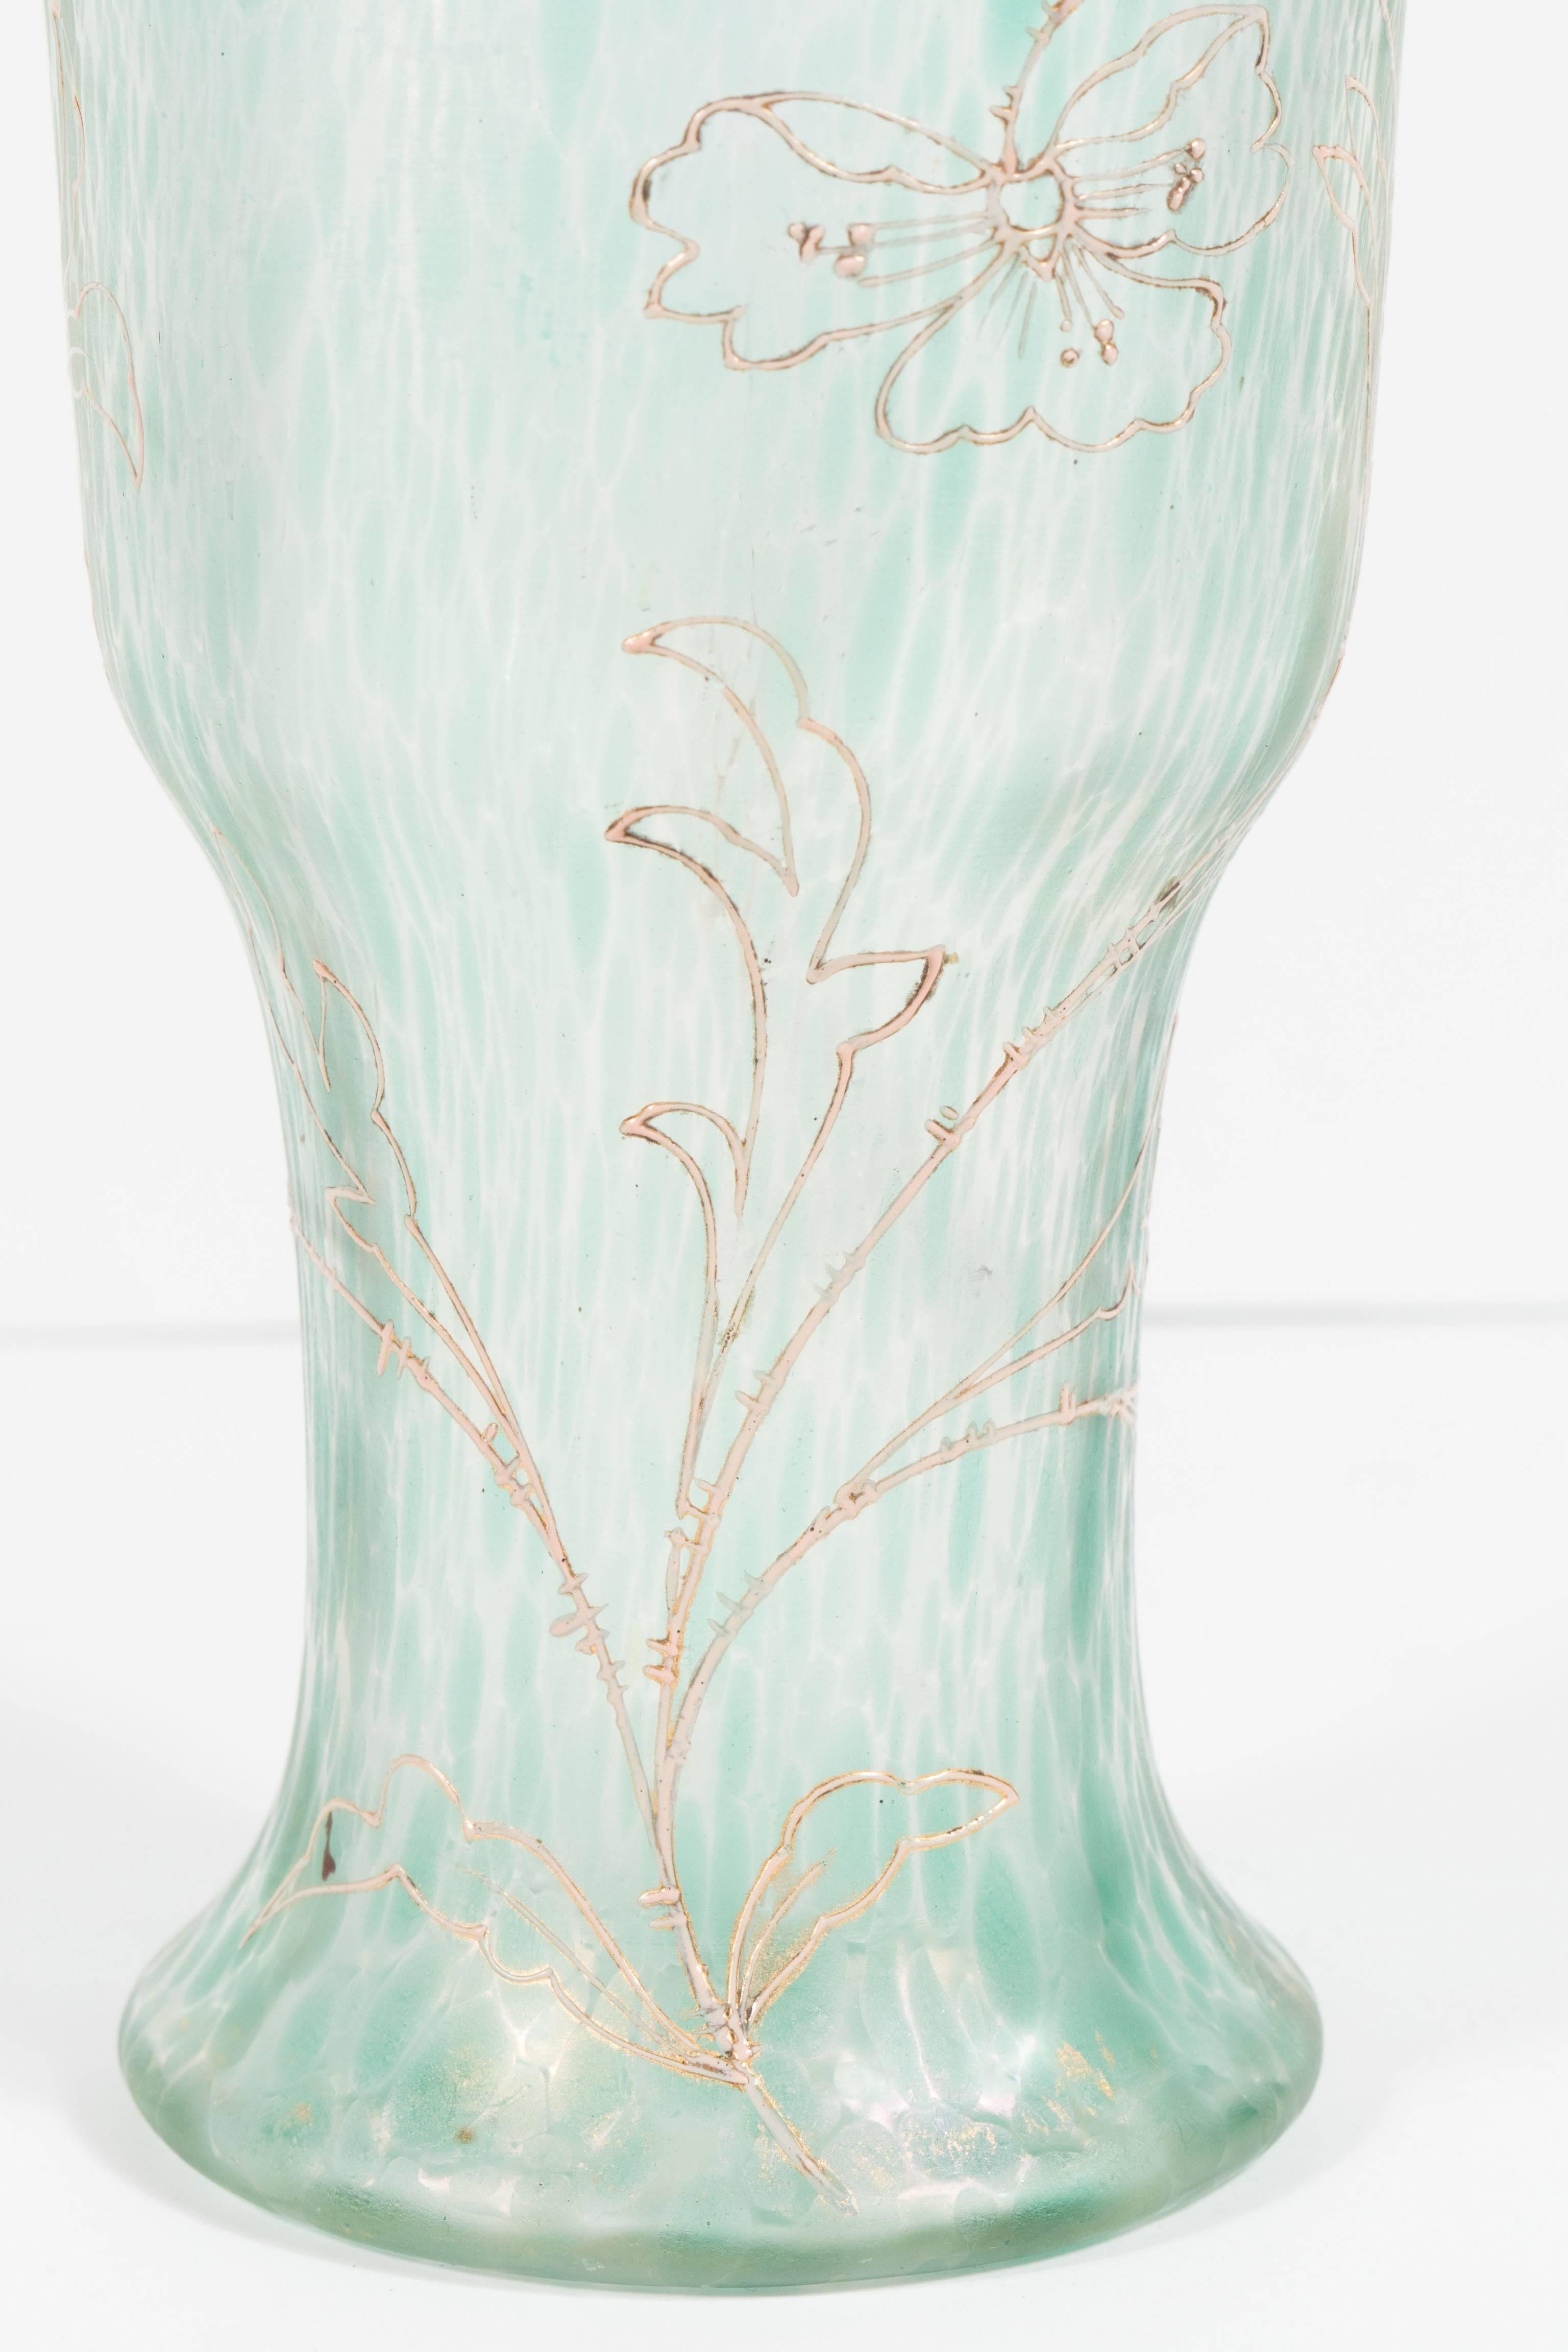 Gold Leaf Art Nouveau Austrian Art Glass Vase in Green Iridescent and Gold Relief Vine